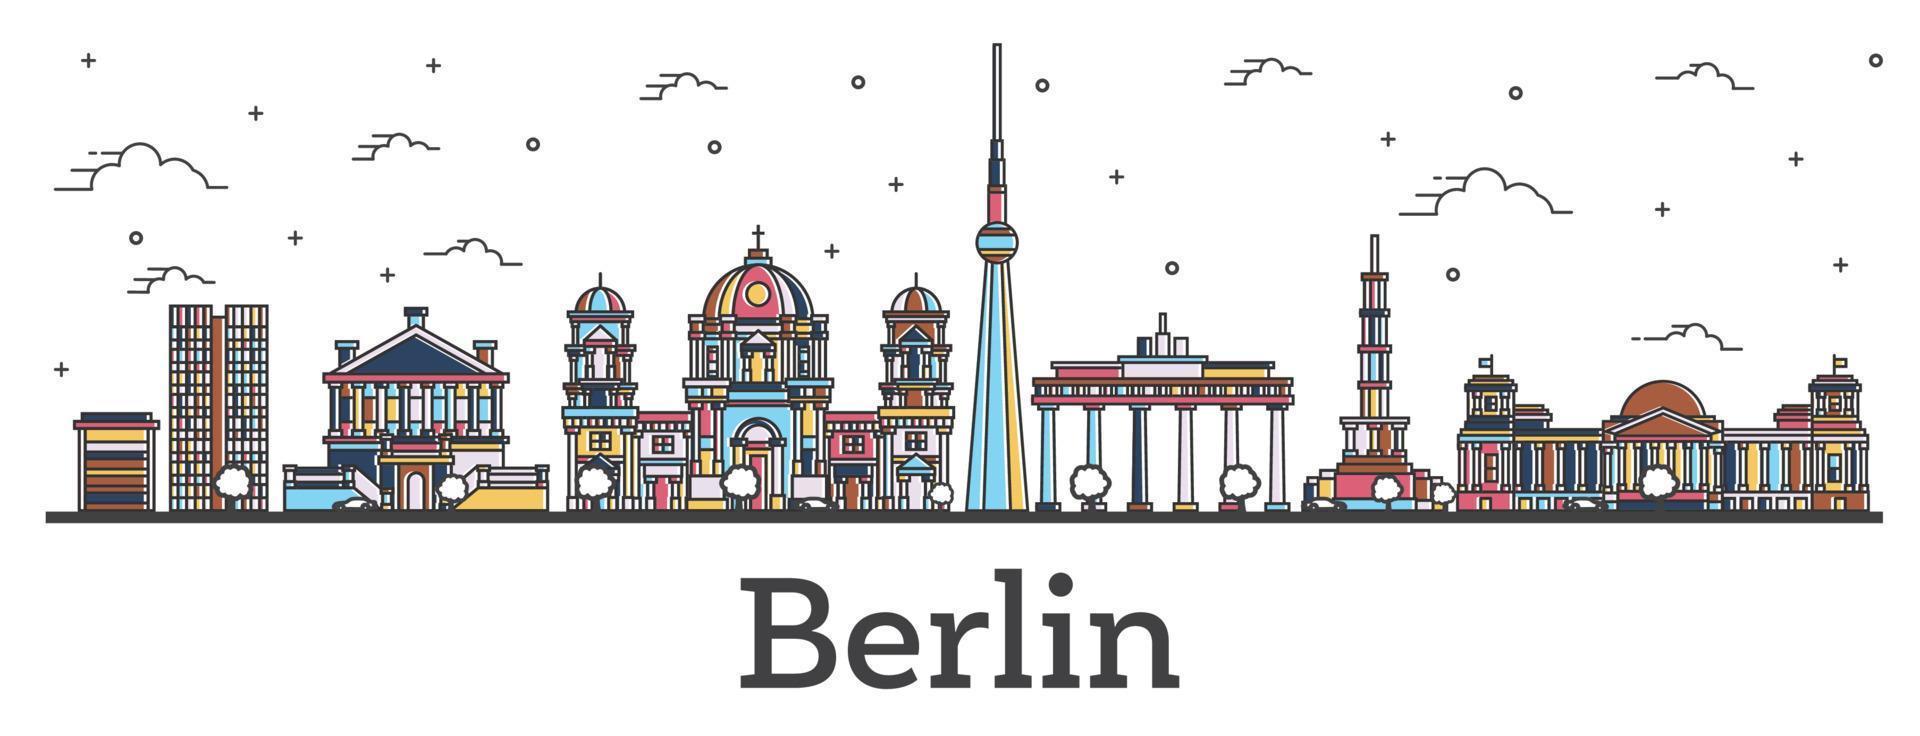 Outline Berlin Germany City Skyline with Color Buildings Isolated on White. vector